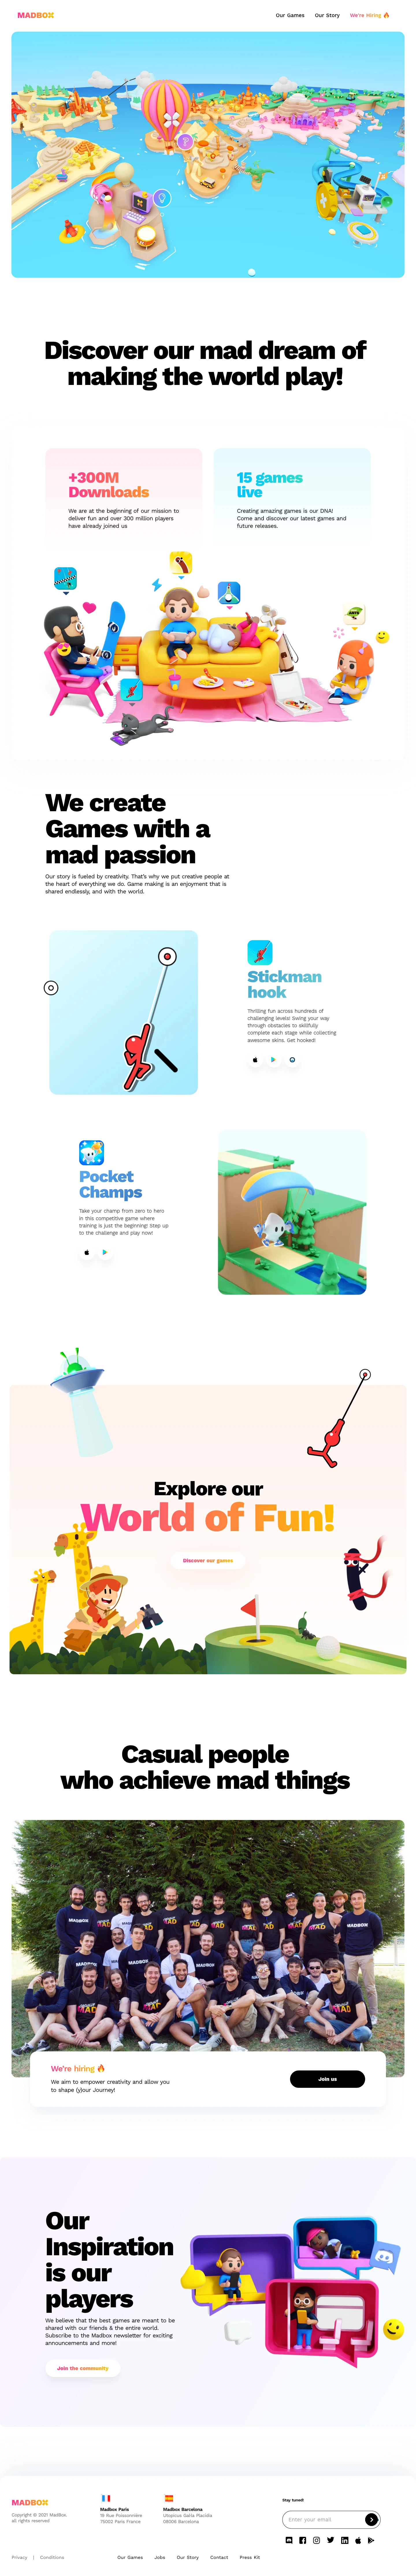 Madbox Landing Page Example: We are game makers who create experience for millions of players